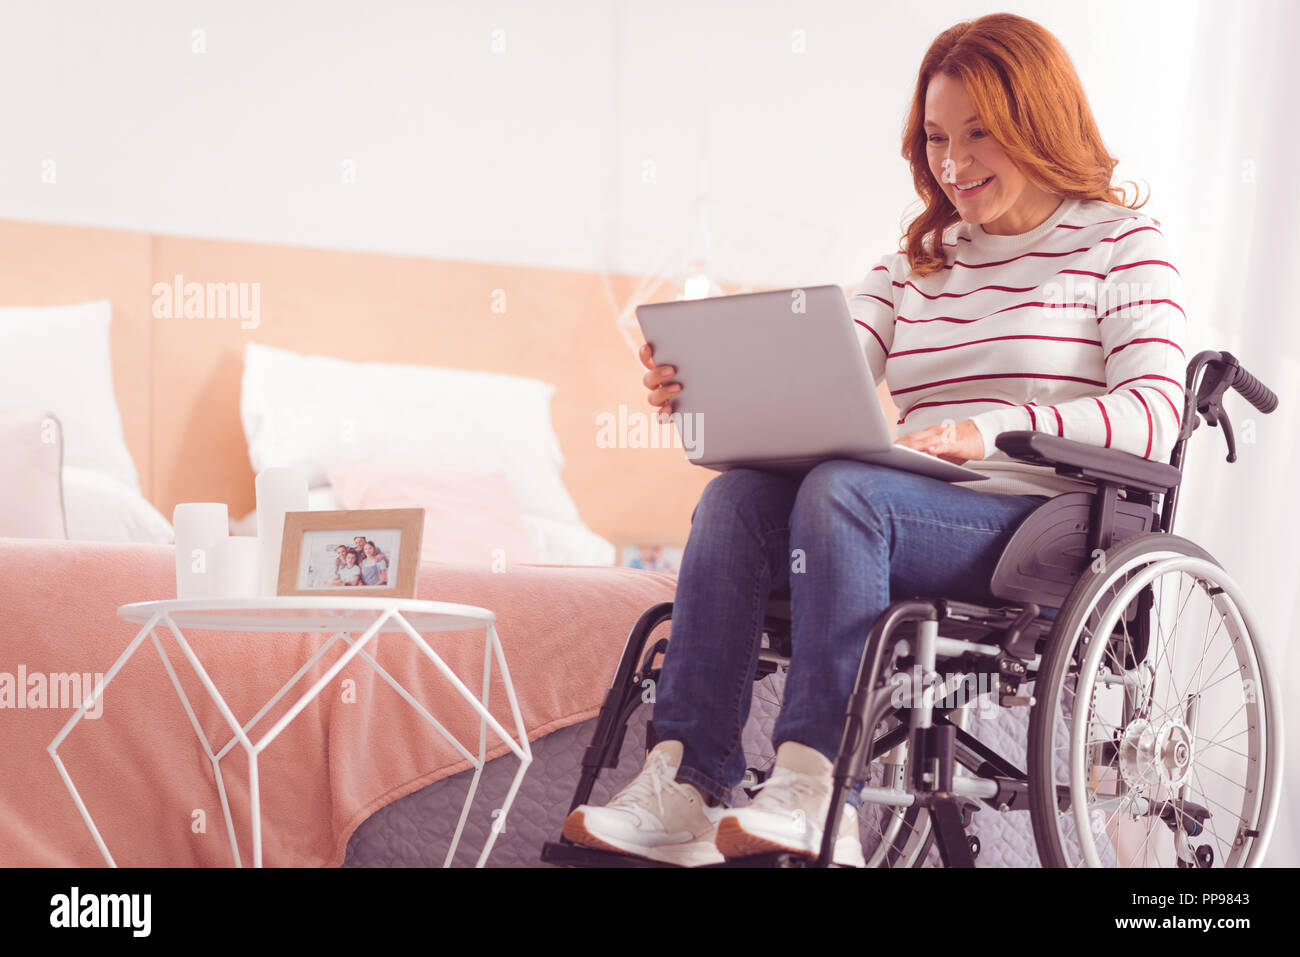 Positive disabled woman surfing the internet Stock Photo